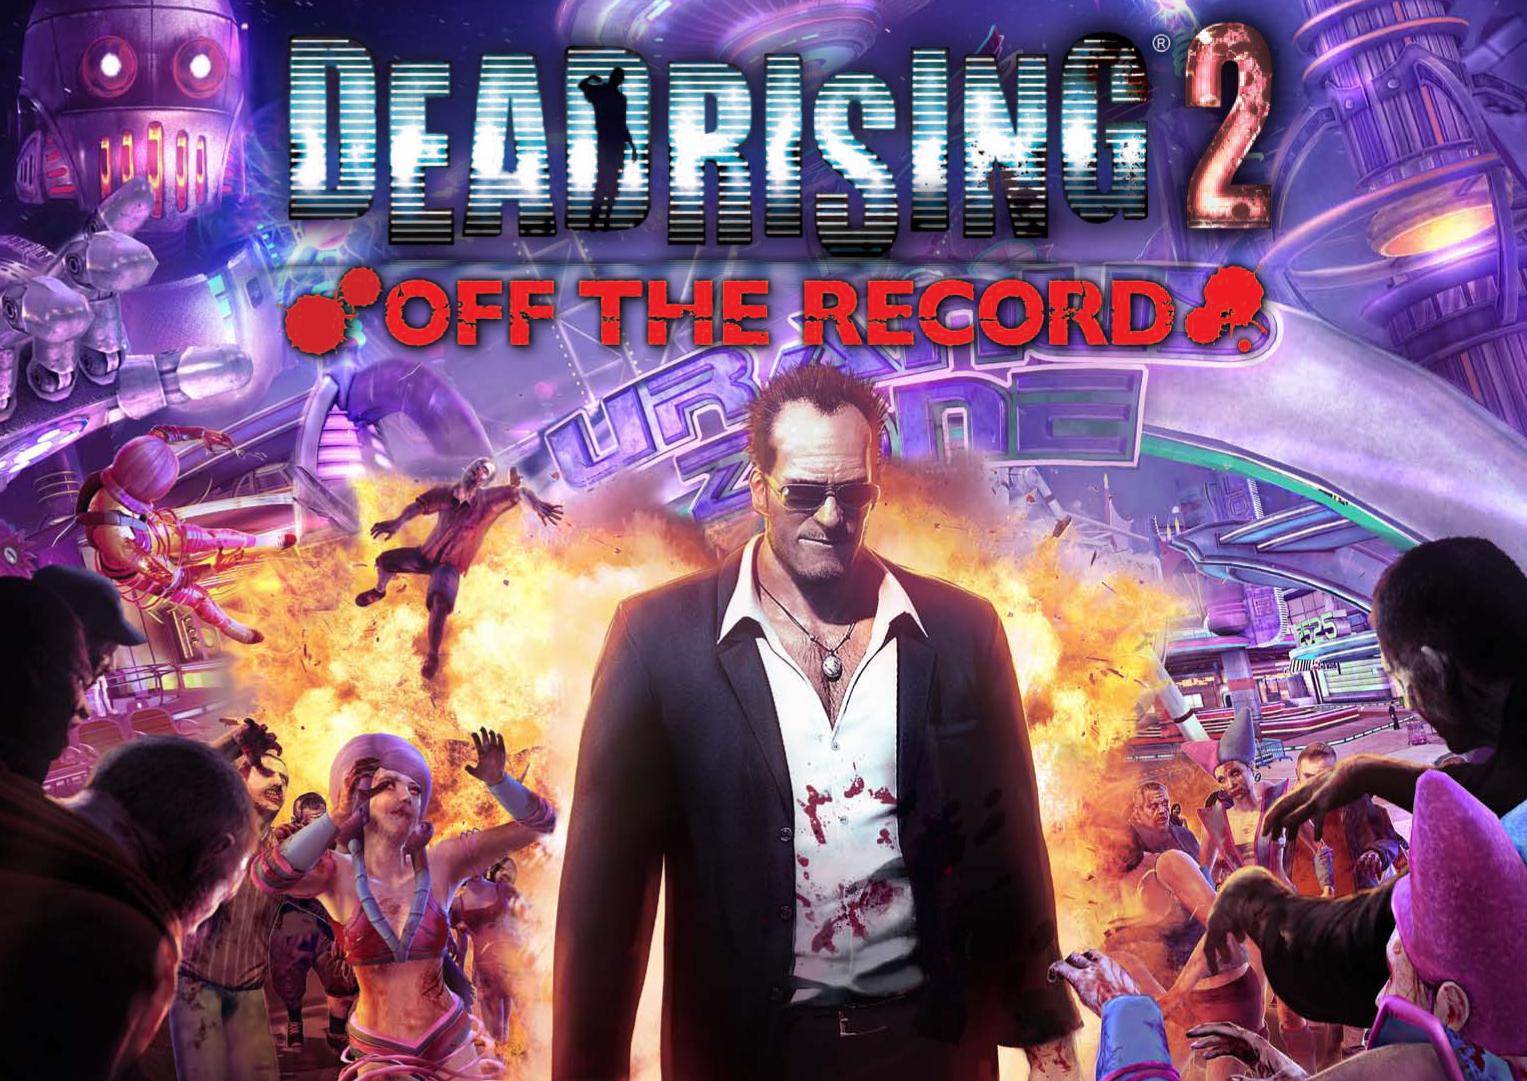 DeadRising2OffTheRecord 